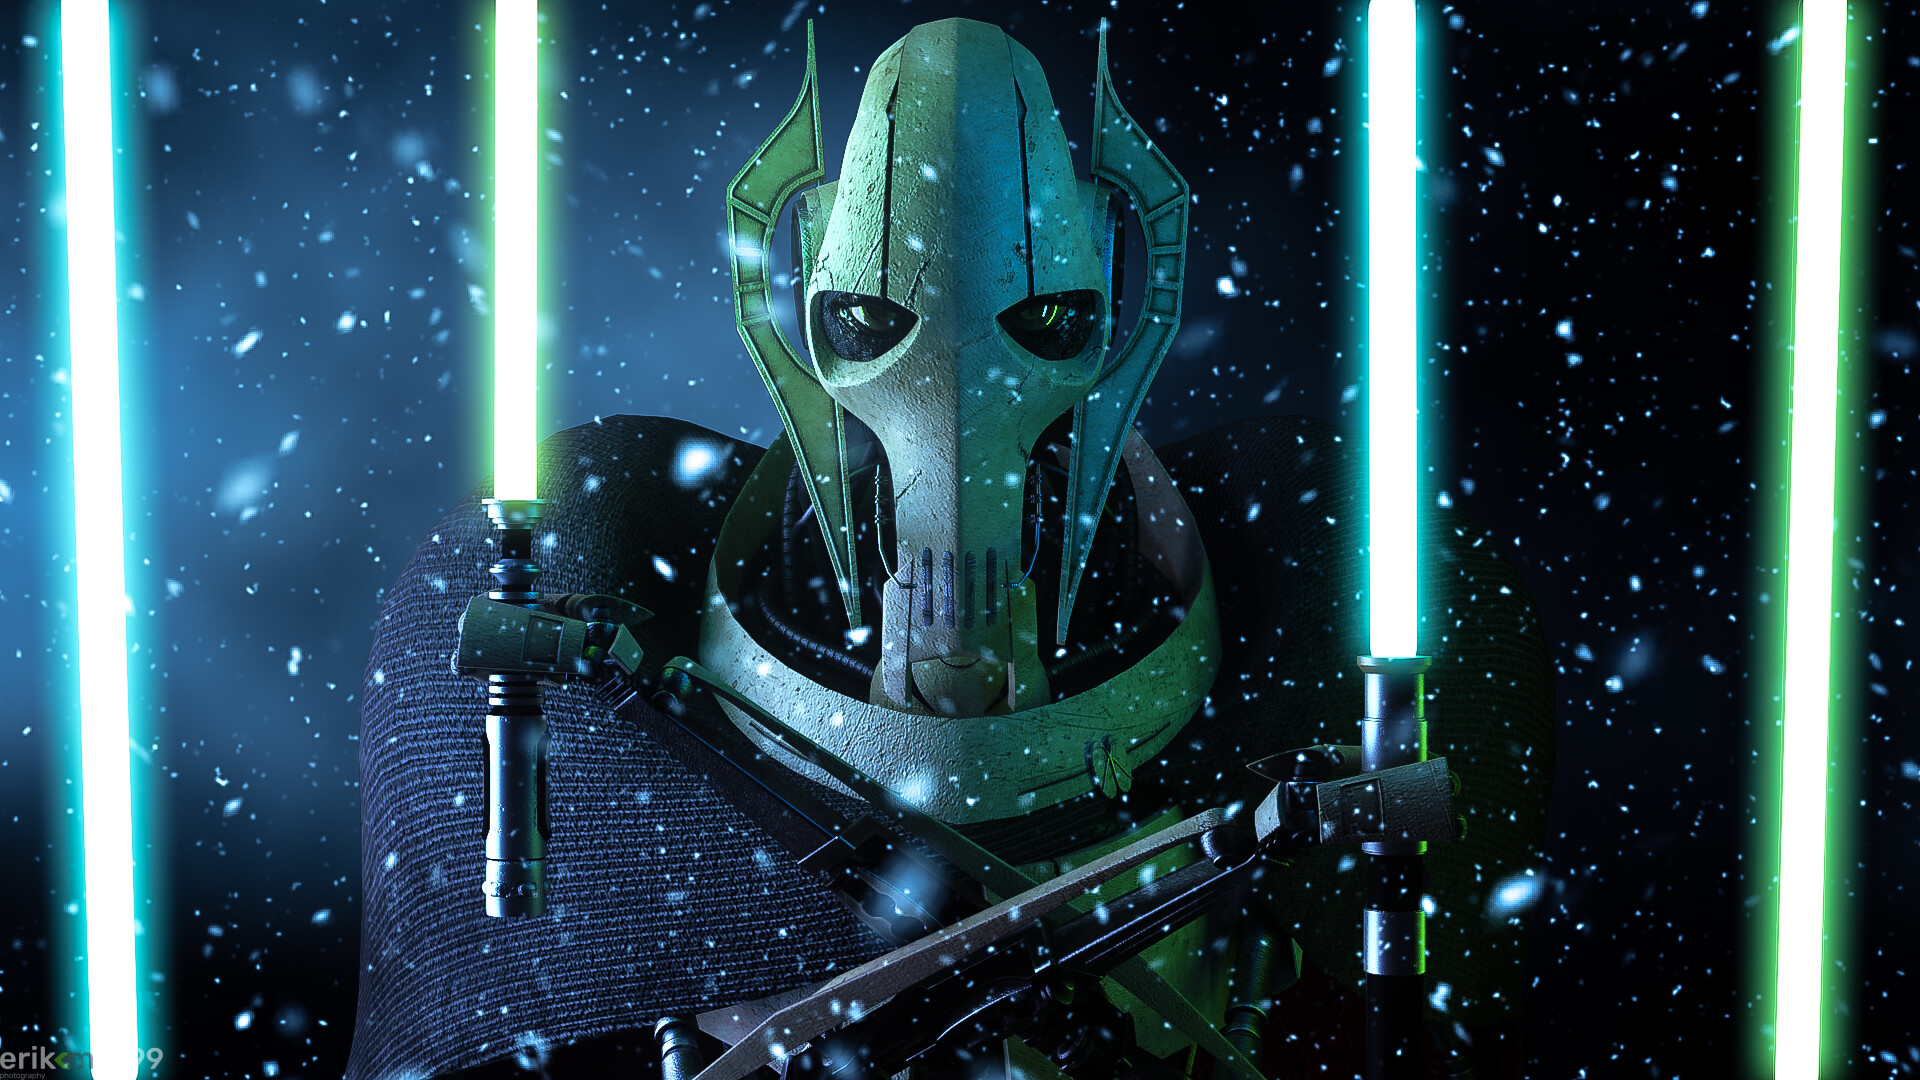 General Grievous: Melee combatant during numerous campaigns against the Republic, The Clone Wars. 1920x1080 Full HD Wallpaper.